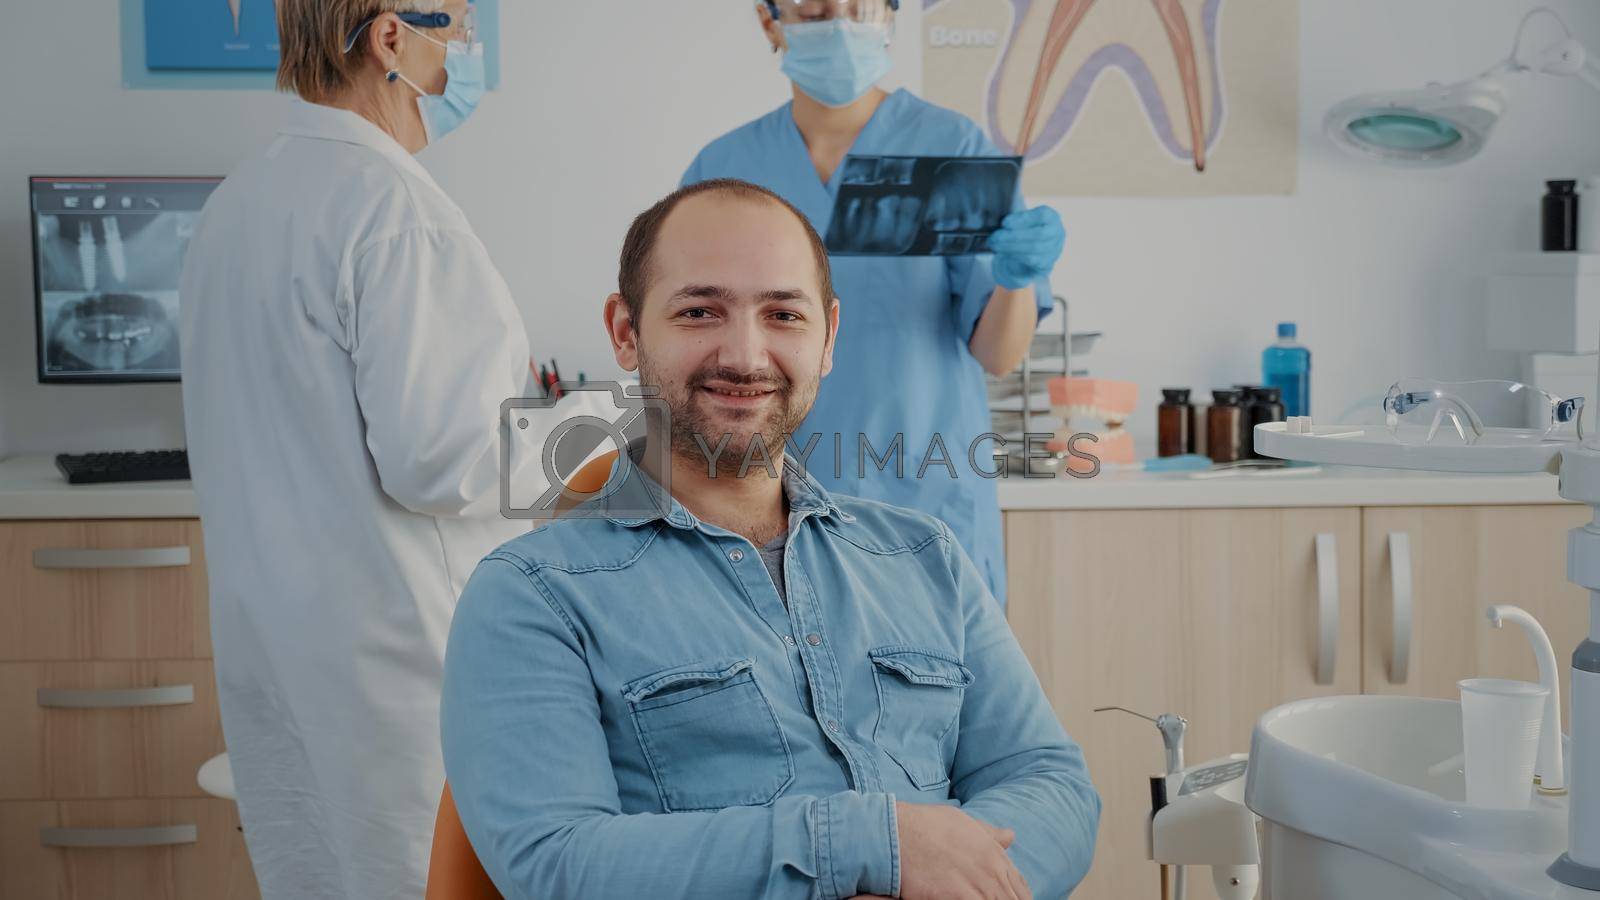 Portrait of patient sitting in dental chair at oral care clinic, looking at camera and smiling. Caucasian man having stomatological appointment with dentistry specialist in cabinet.